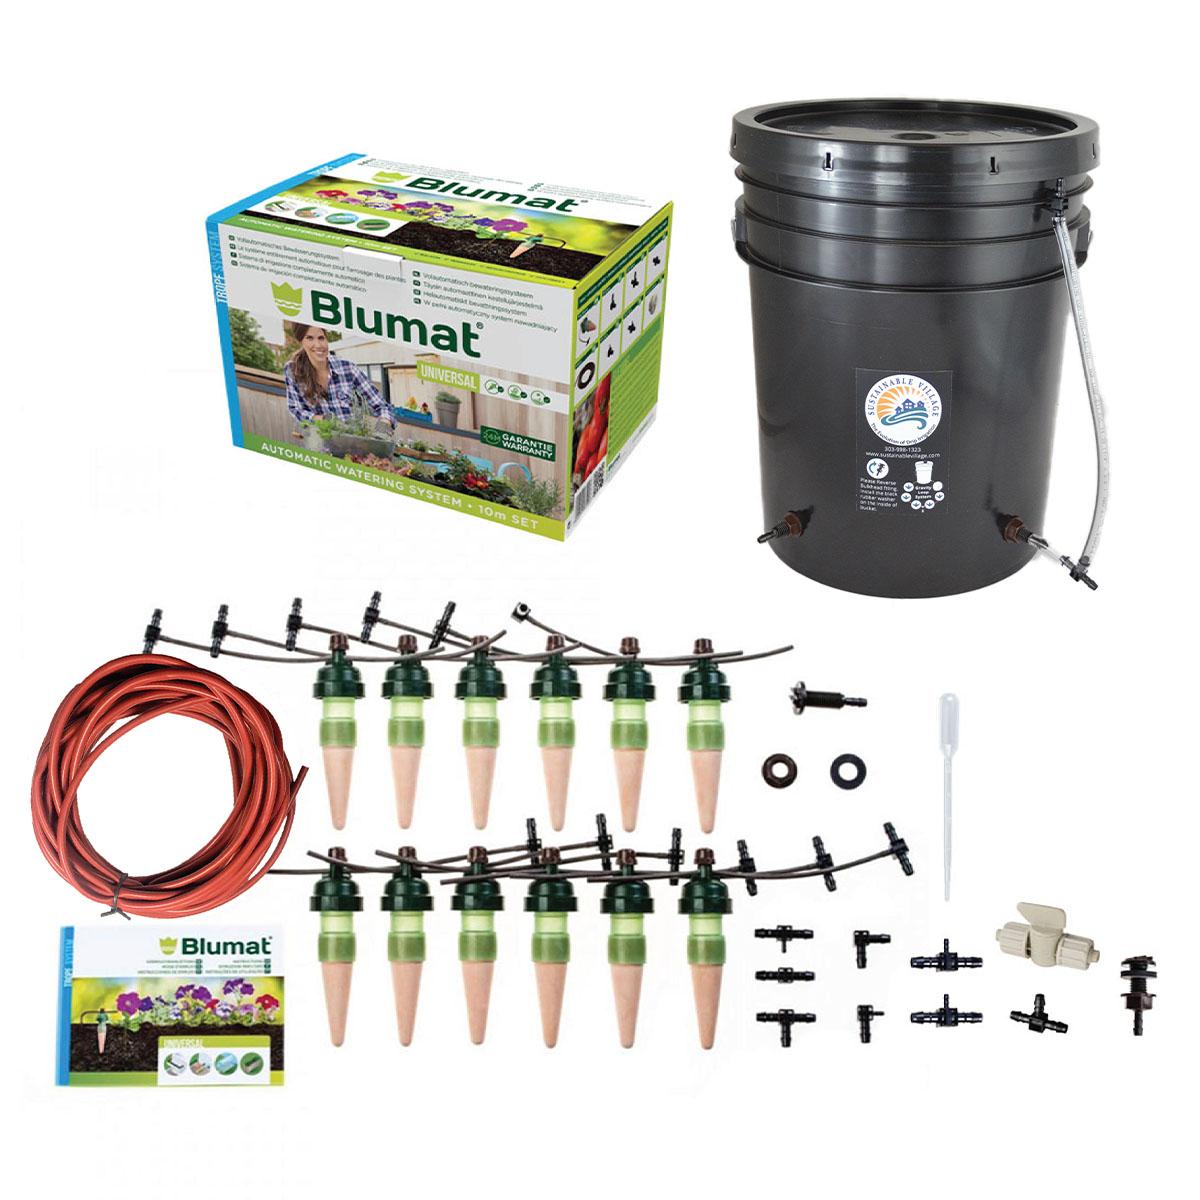 Blumat Medium Deluxe Gravity Kit w/ 5-Gallon Reservoir - Automatic Irrigation for Up to 12 Plants 1